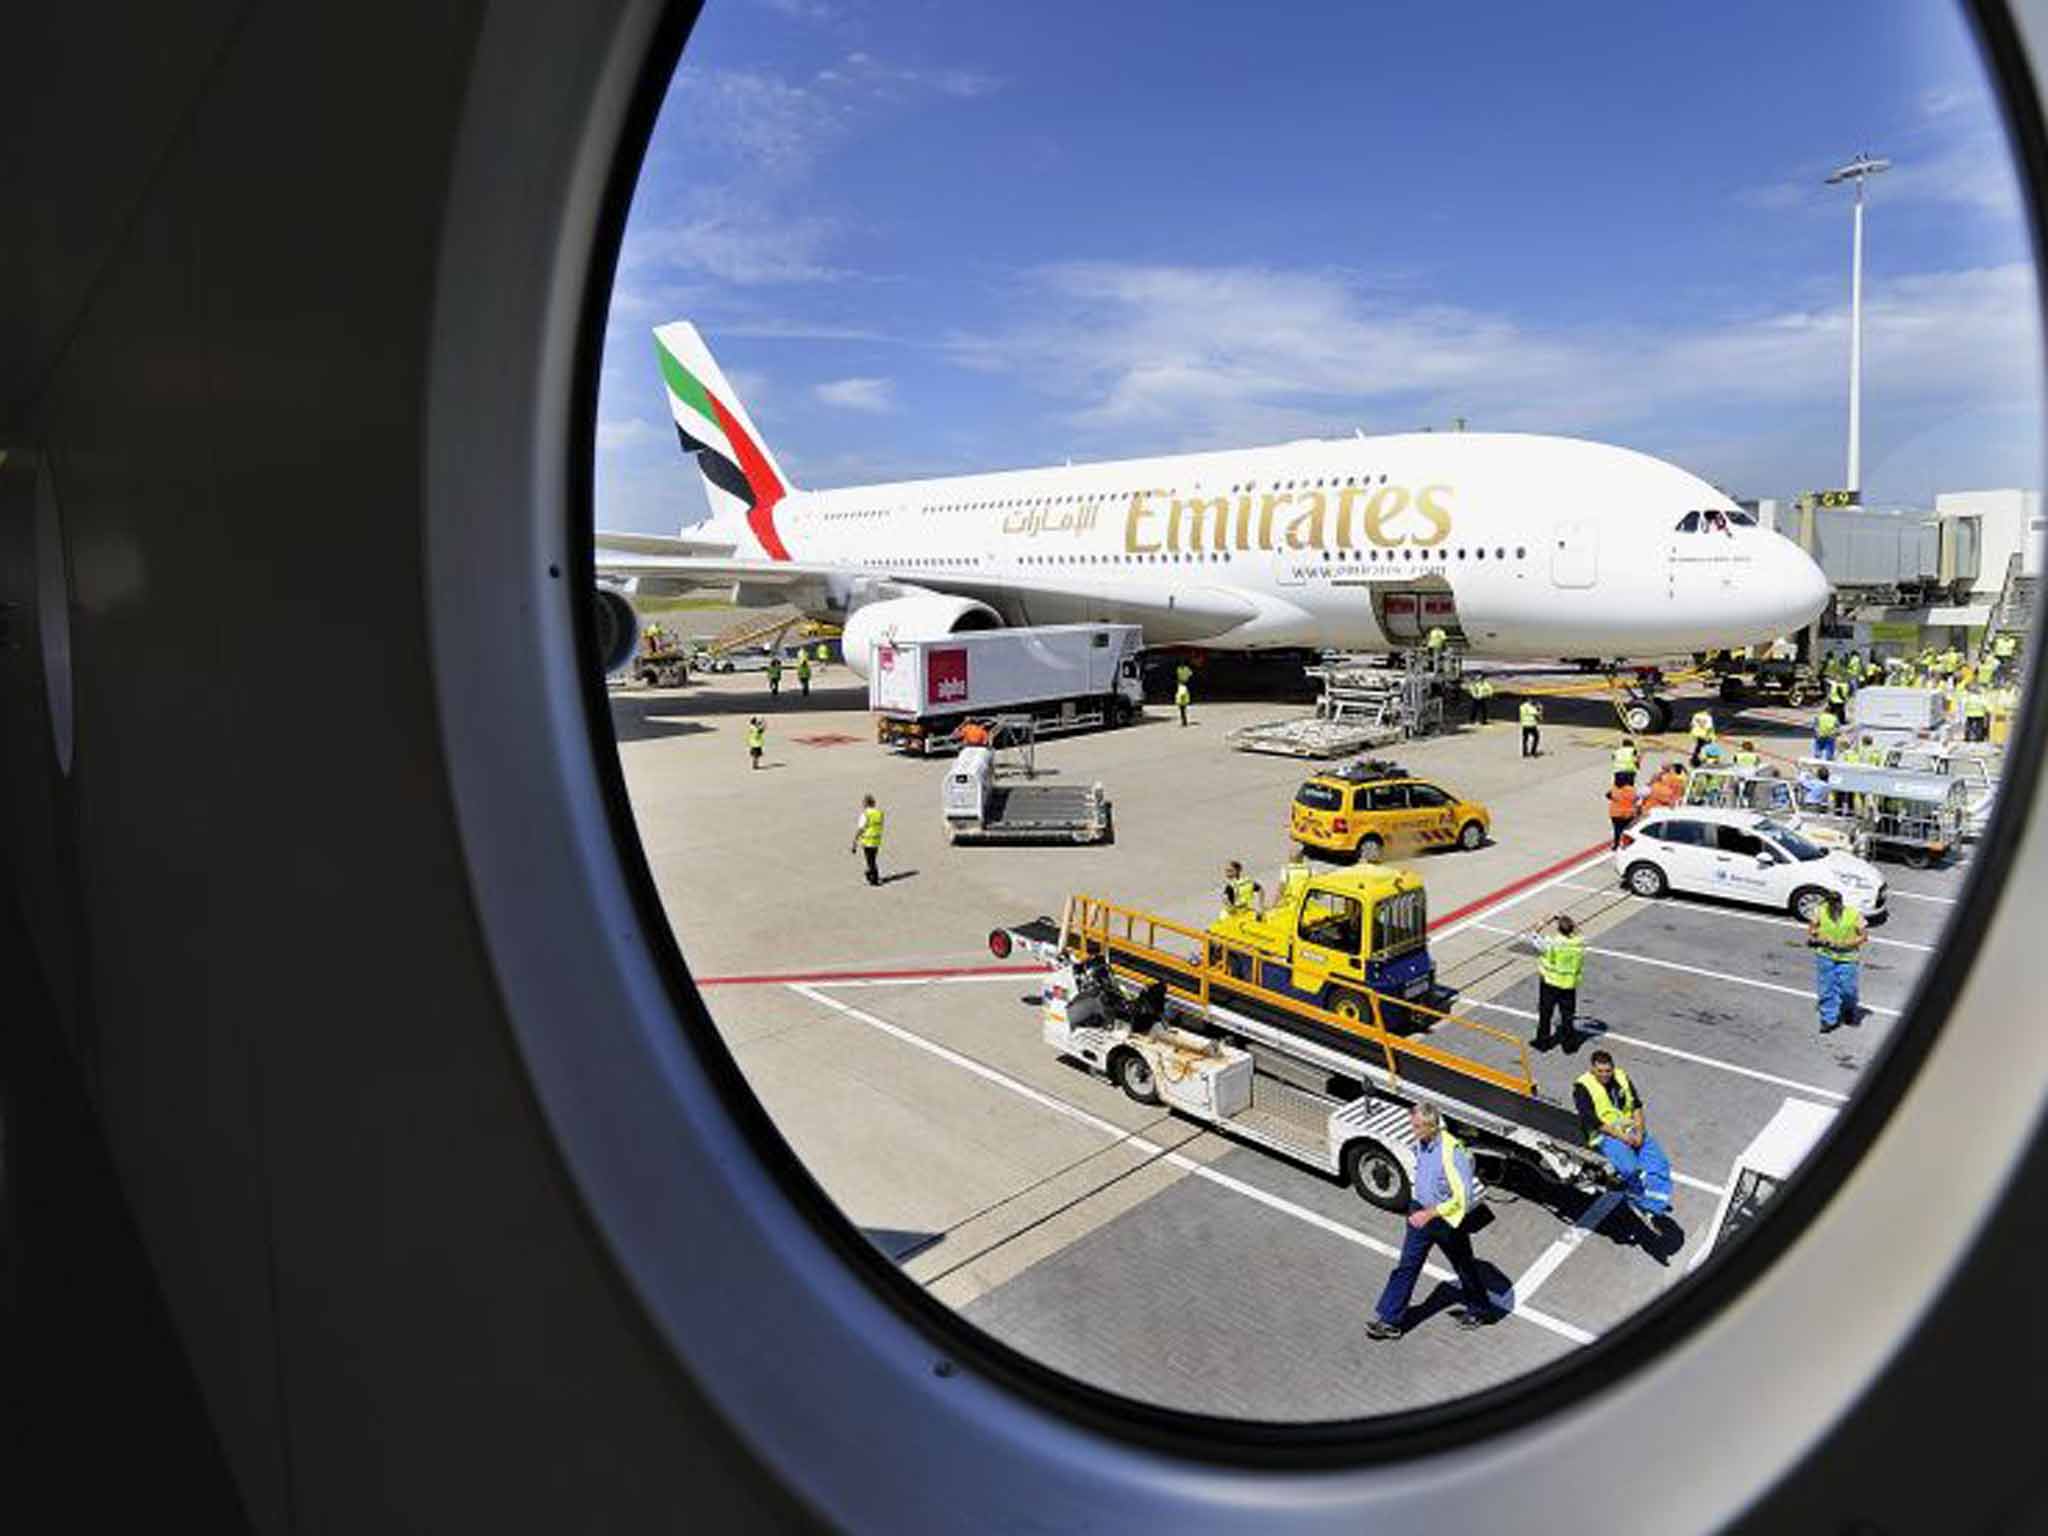 Sky-high ambition: by 2020, Dubai will be home to around 400 aircraft